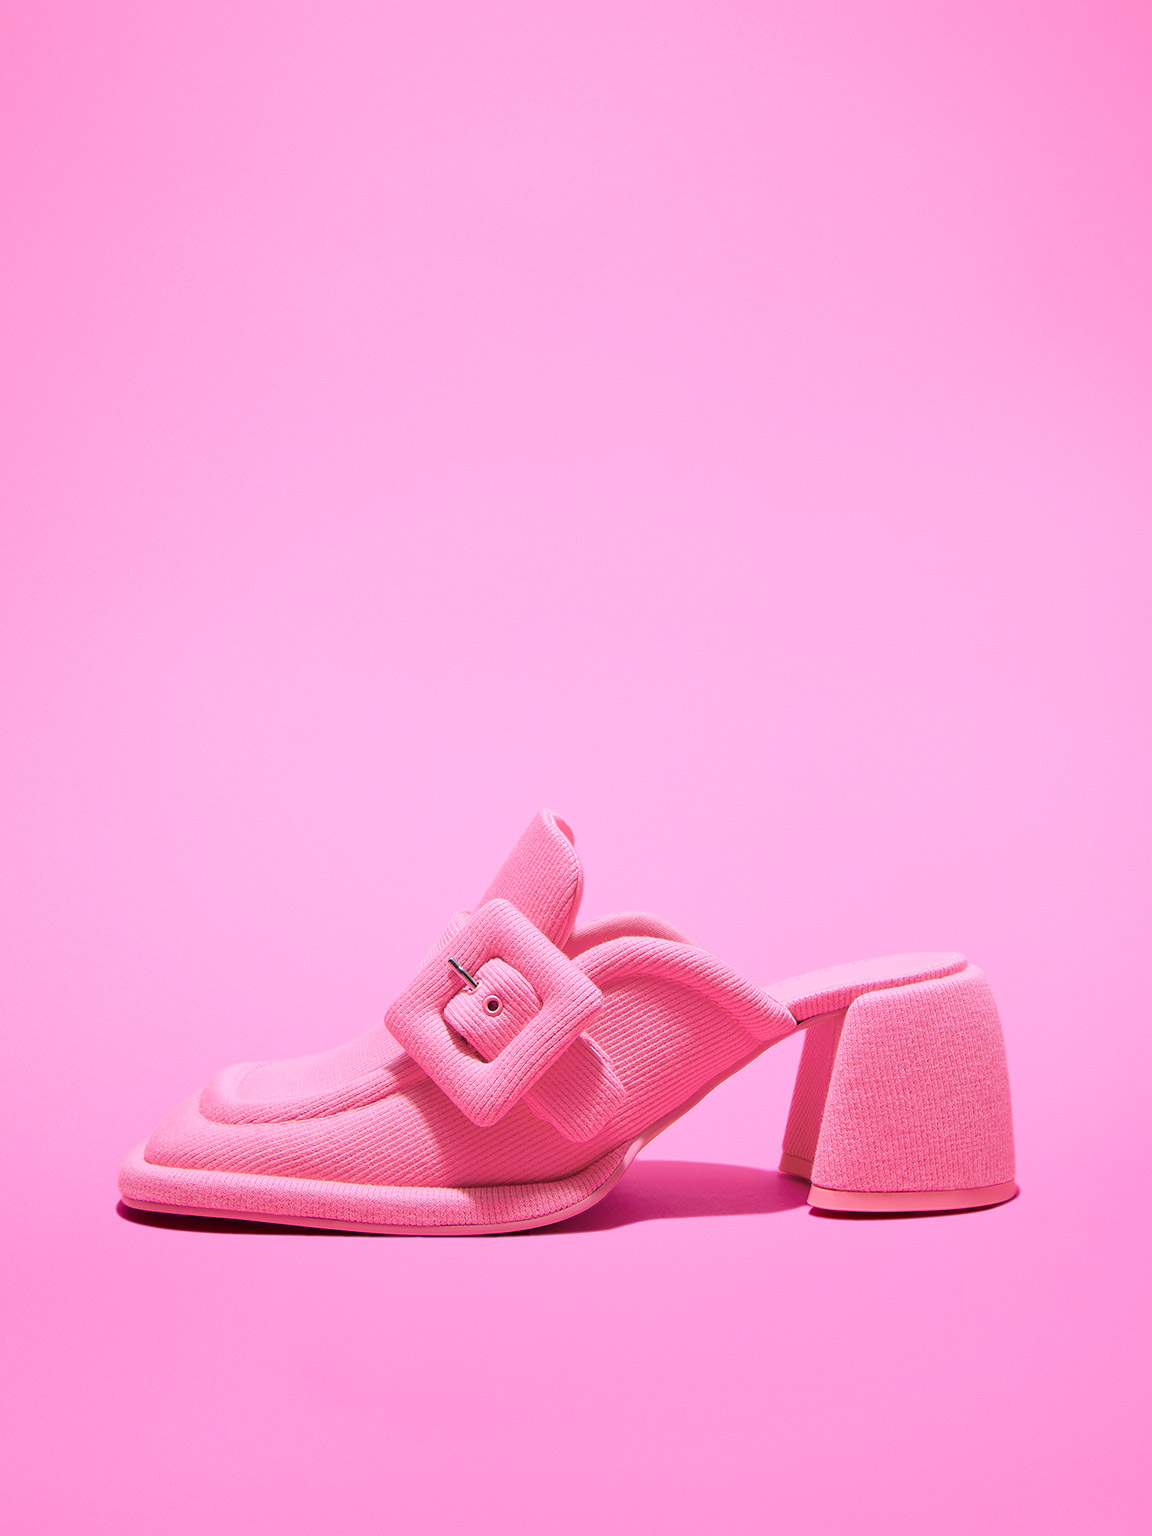 Charles & Keith Woven Buckled Loafer Mules In Pink